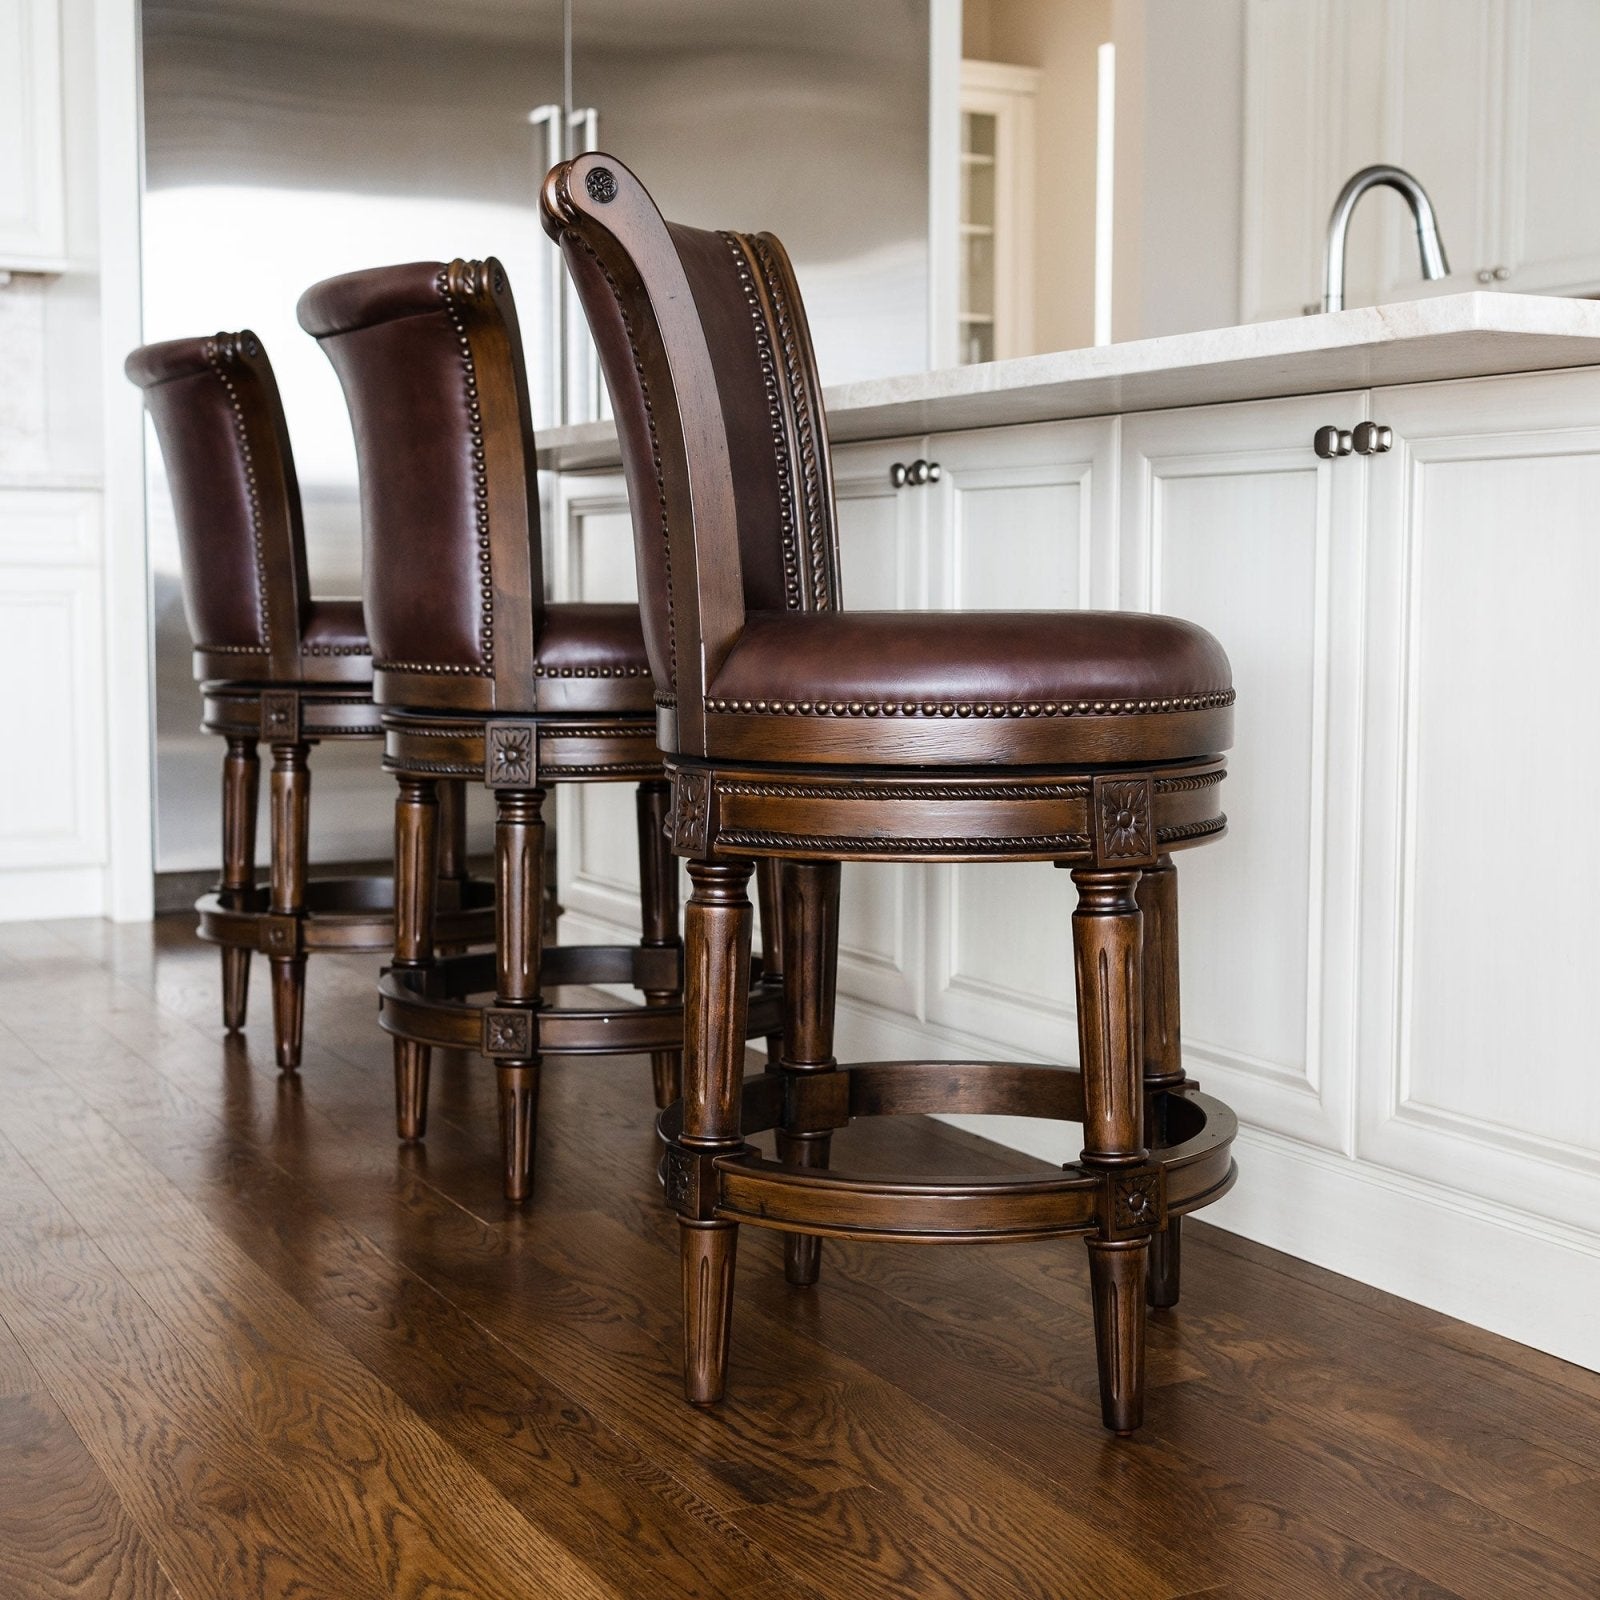 Pullman Counter Stool in Dark Walnut Finish with Vintage Brown Vegan Leather in Stools by Maven Lane